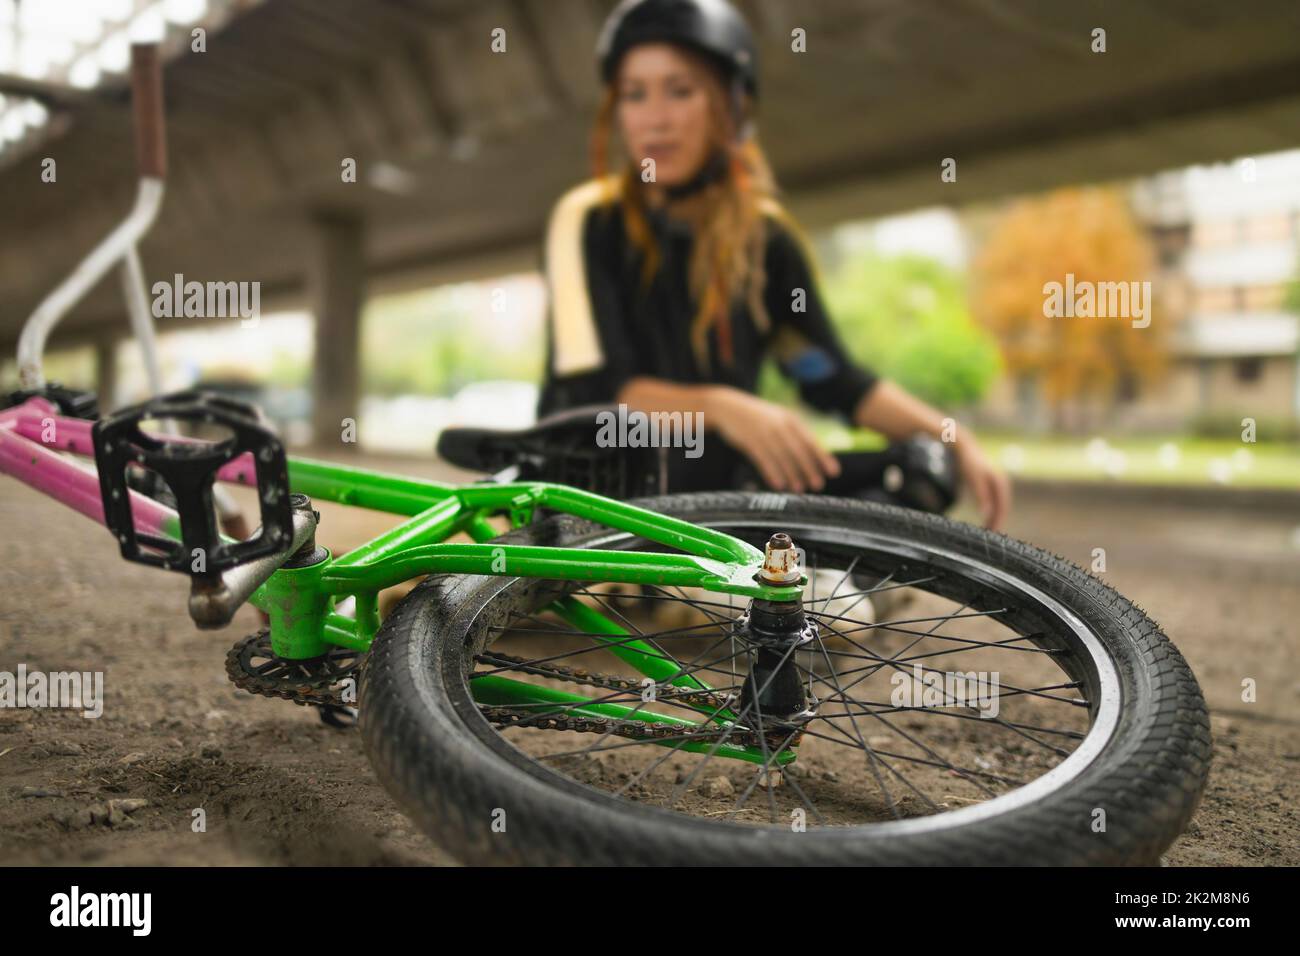 Bicycle in front of young active woman Stock Photo